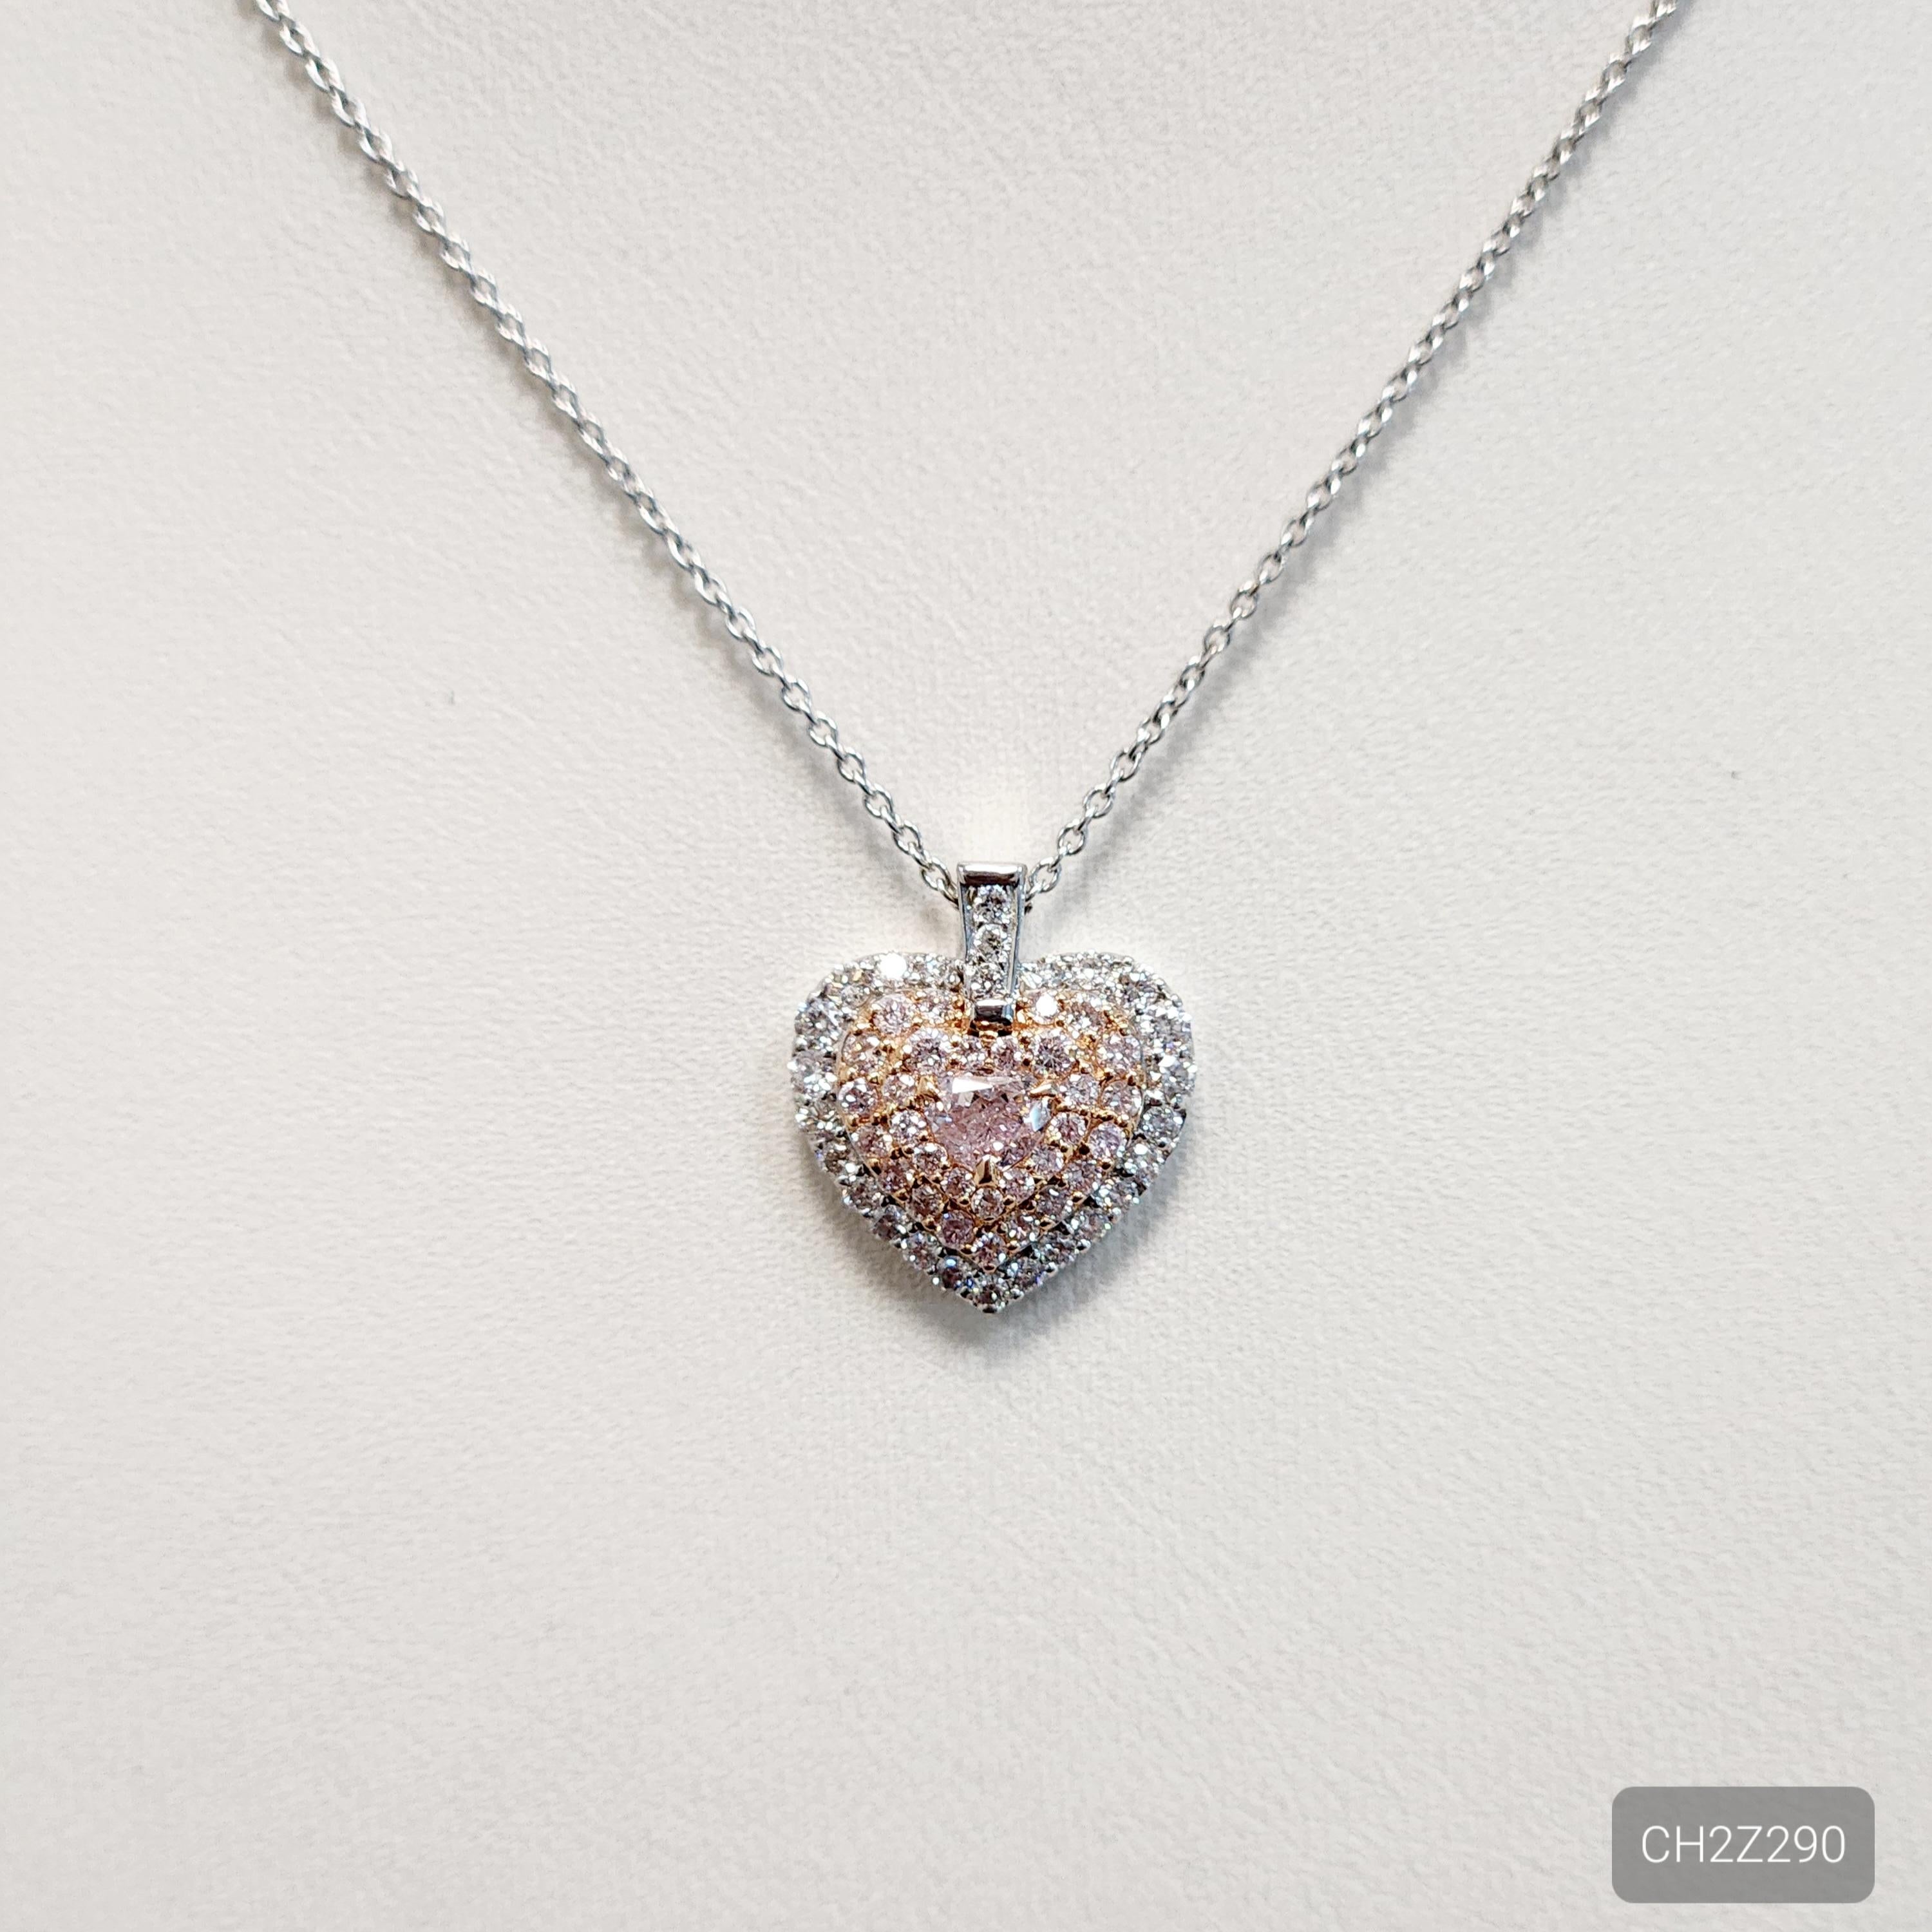 The Heart Shaped Pink Diamond Necklace Chain is a striking piece of jewelry that showcases a beautiful 0.20 carat heart-shaped pink diamond surrounded by a halo of 0.21 carat white and 0.24 carat pink melee diamonds. The combination of these